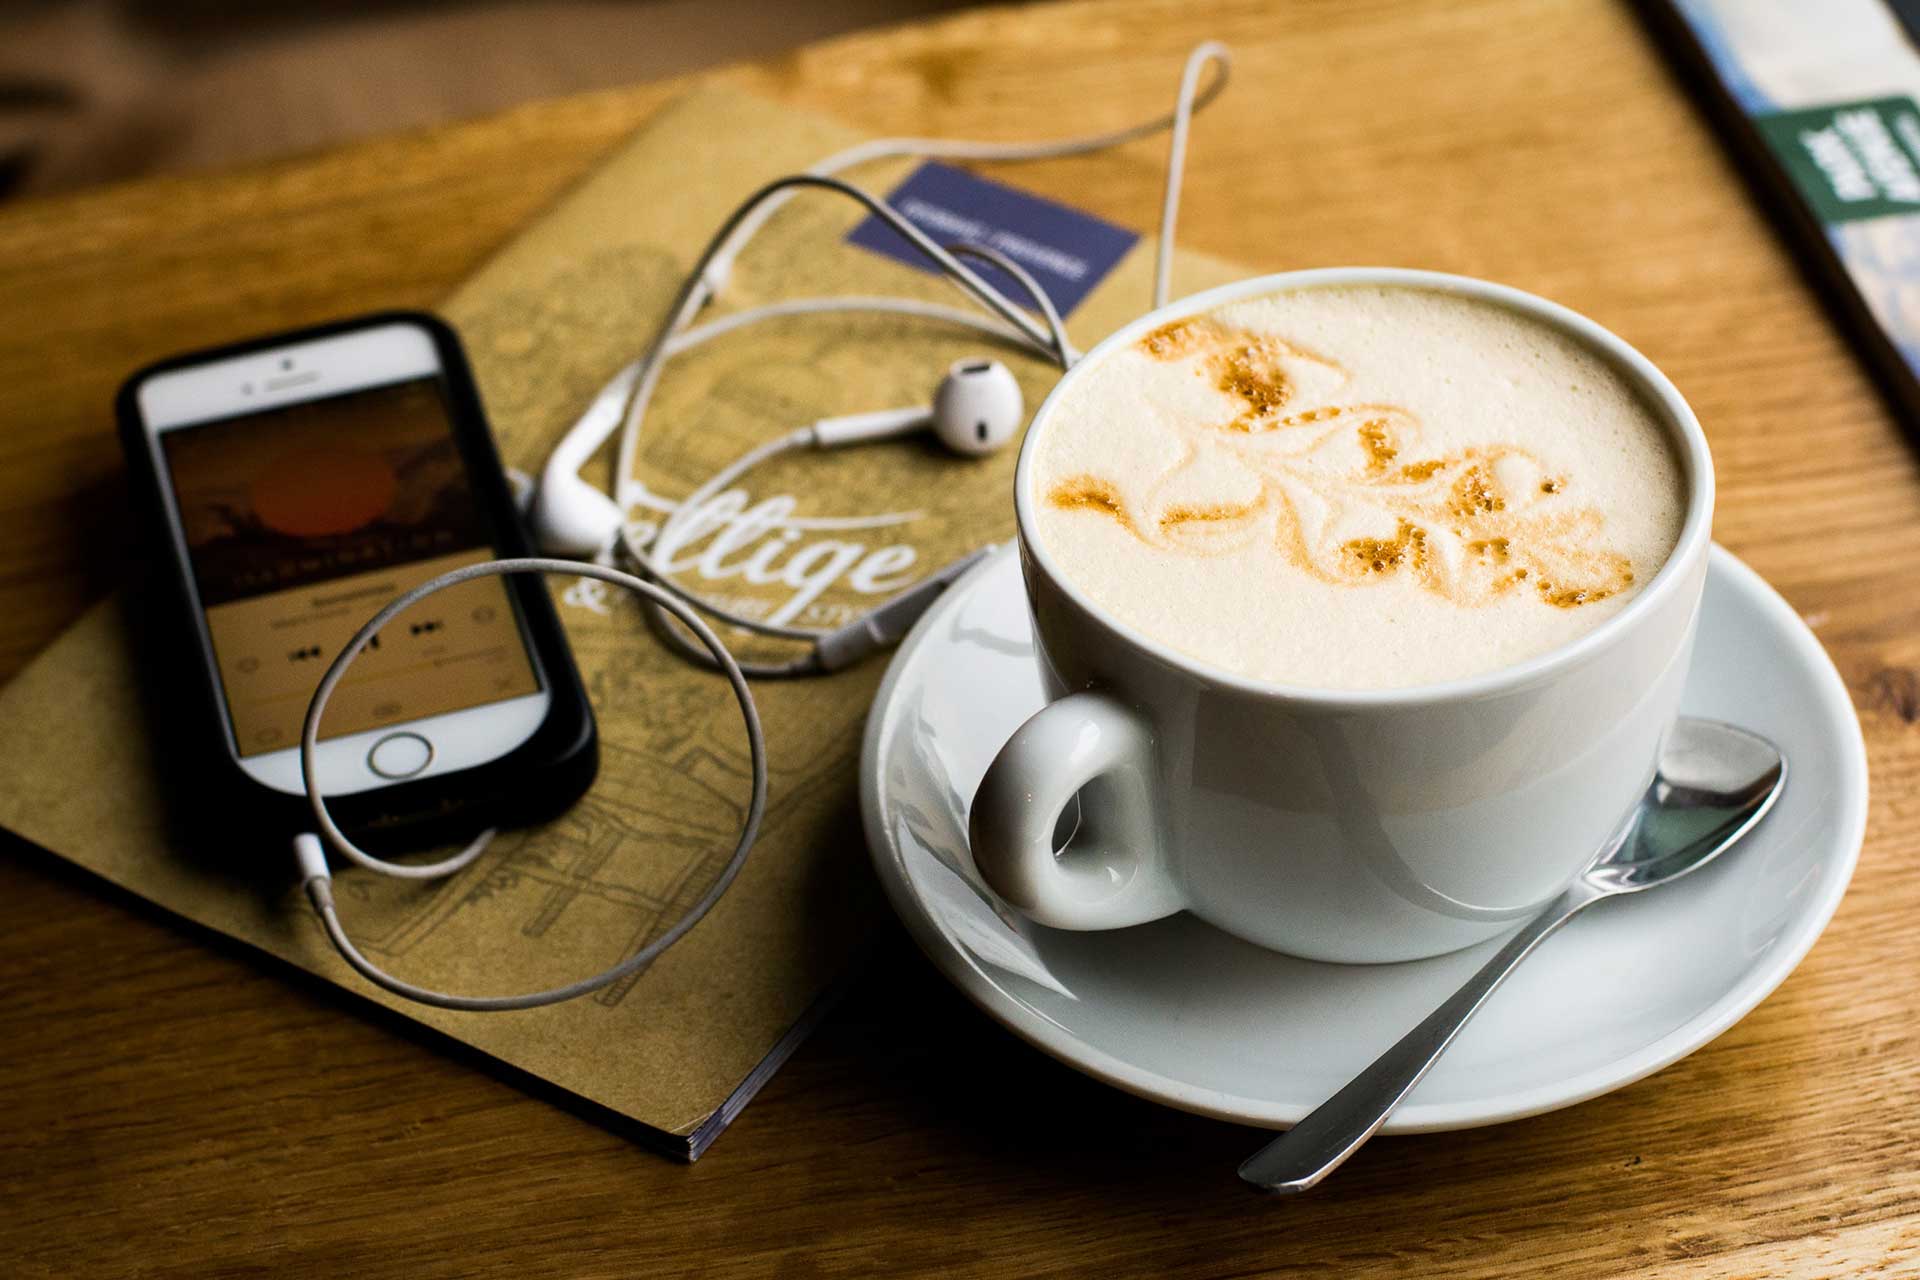 Phone with headphones attached and a coffee on a table